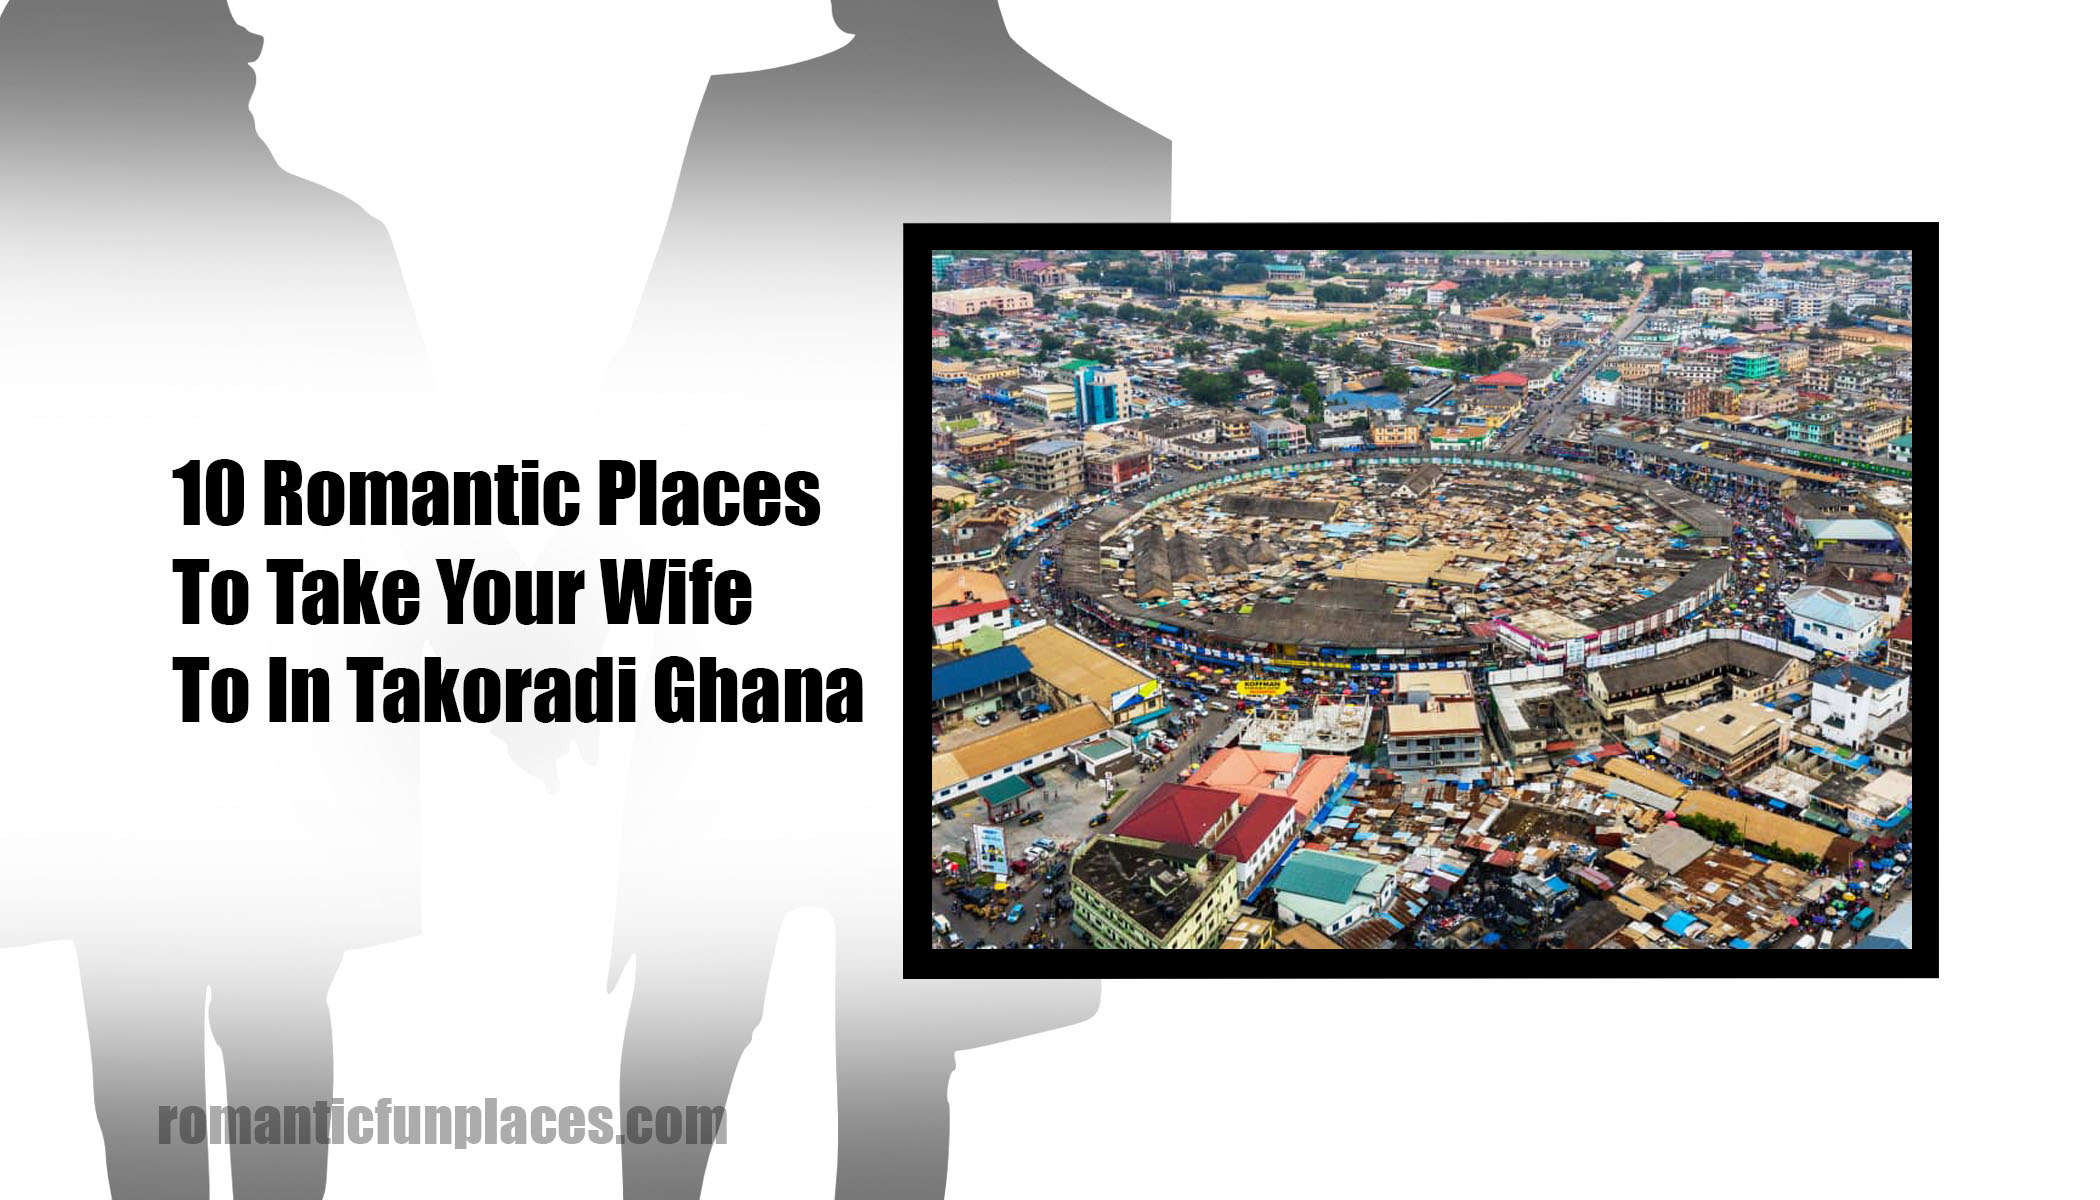 10 Romantic Places To Take Your Wife To In Takoradi Ghana